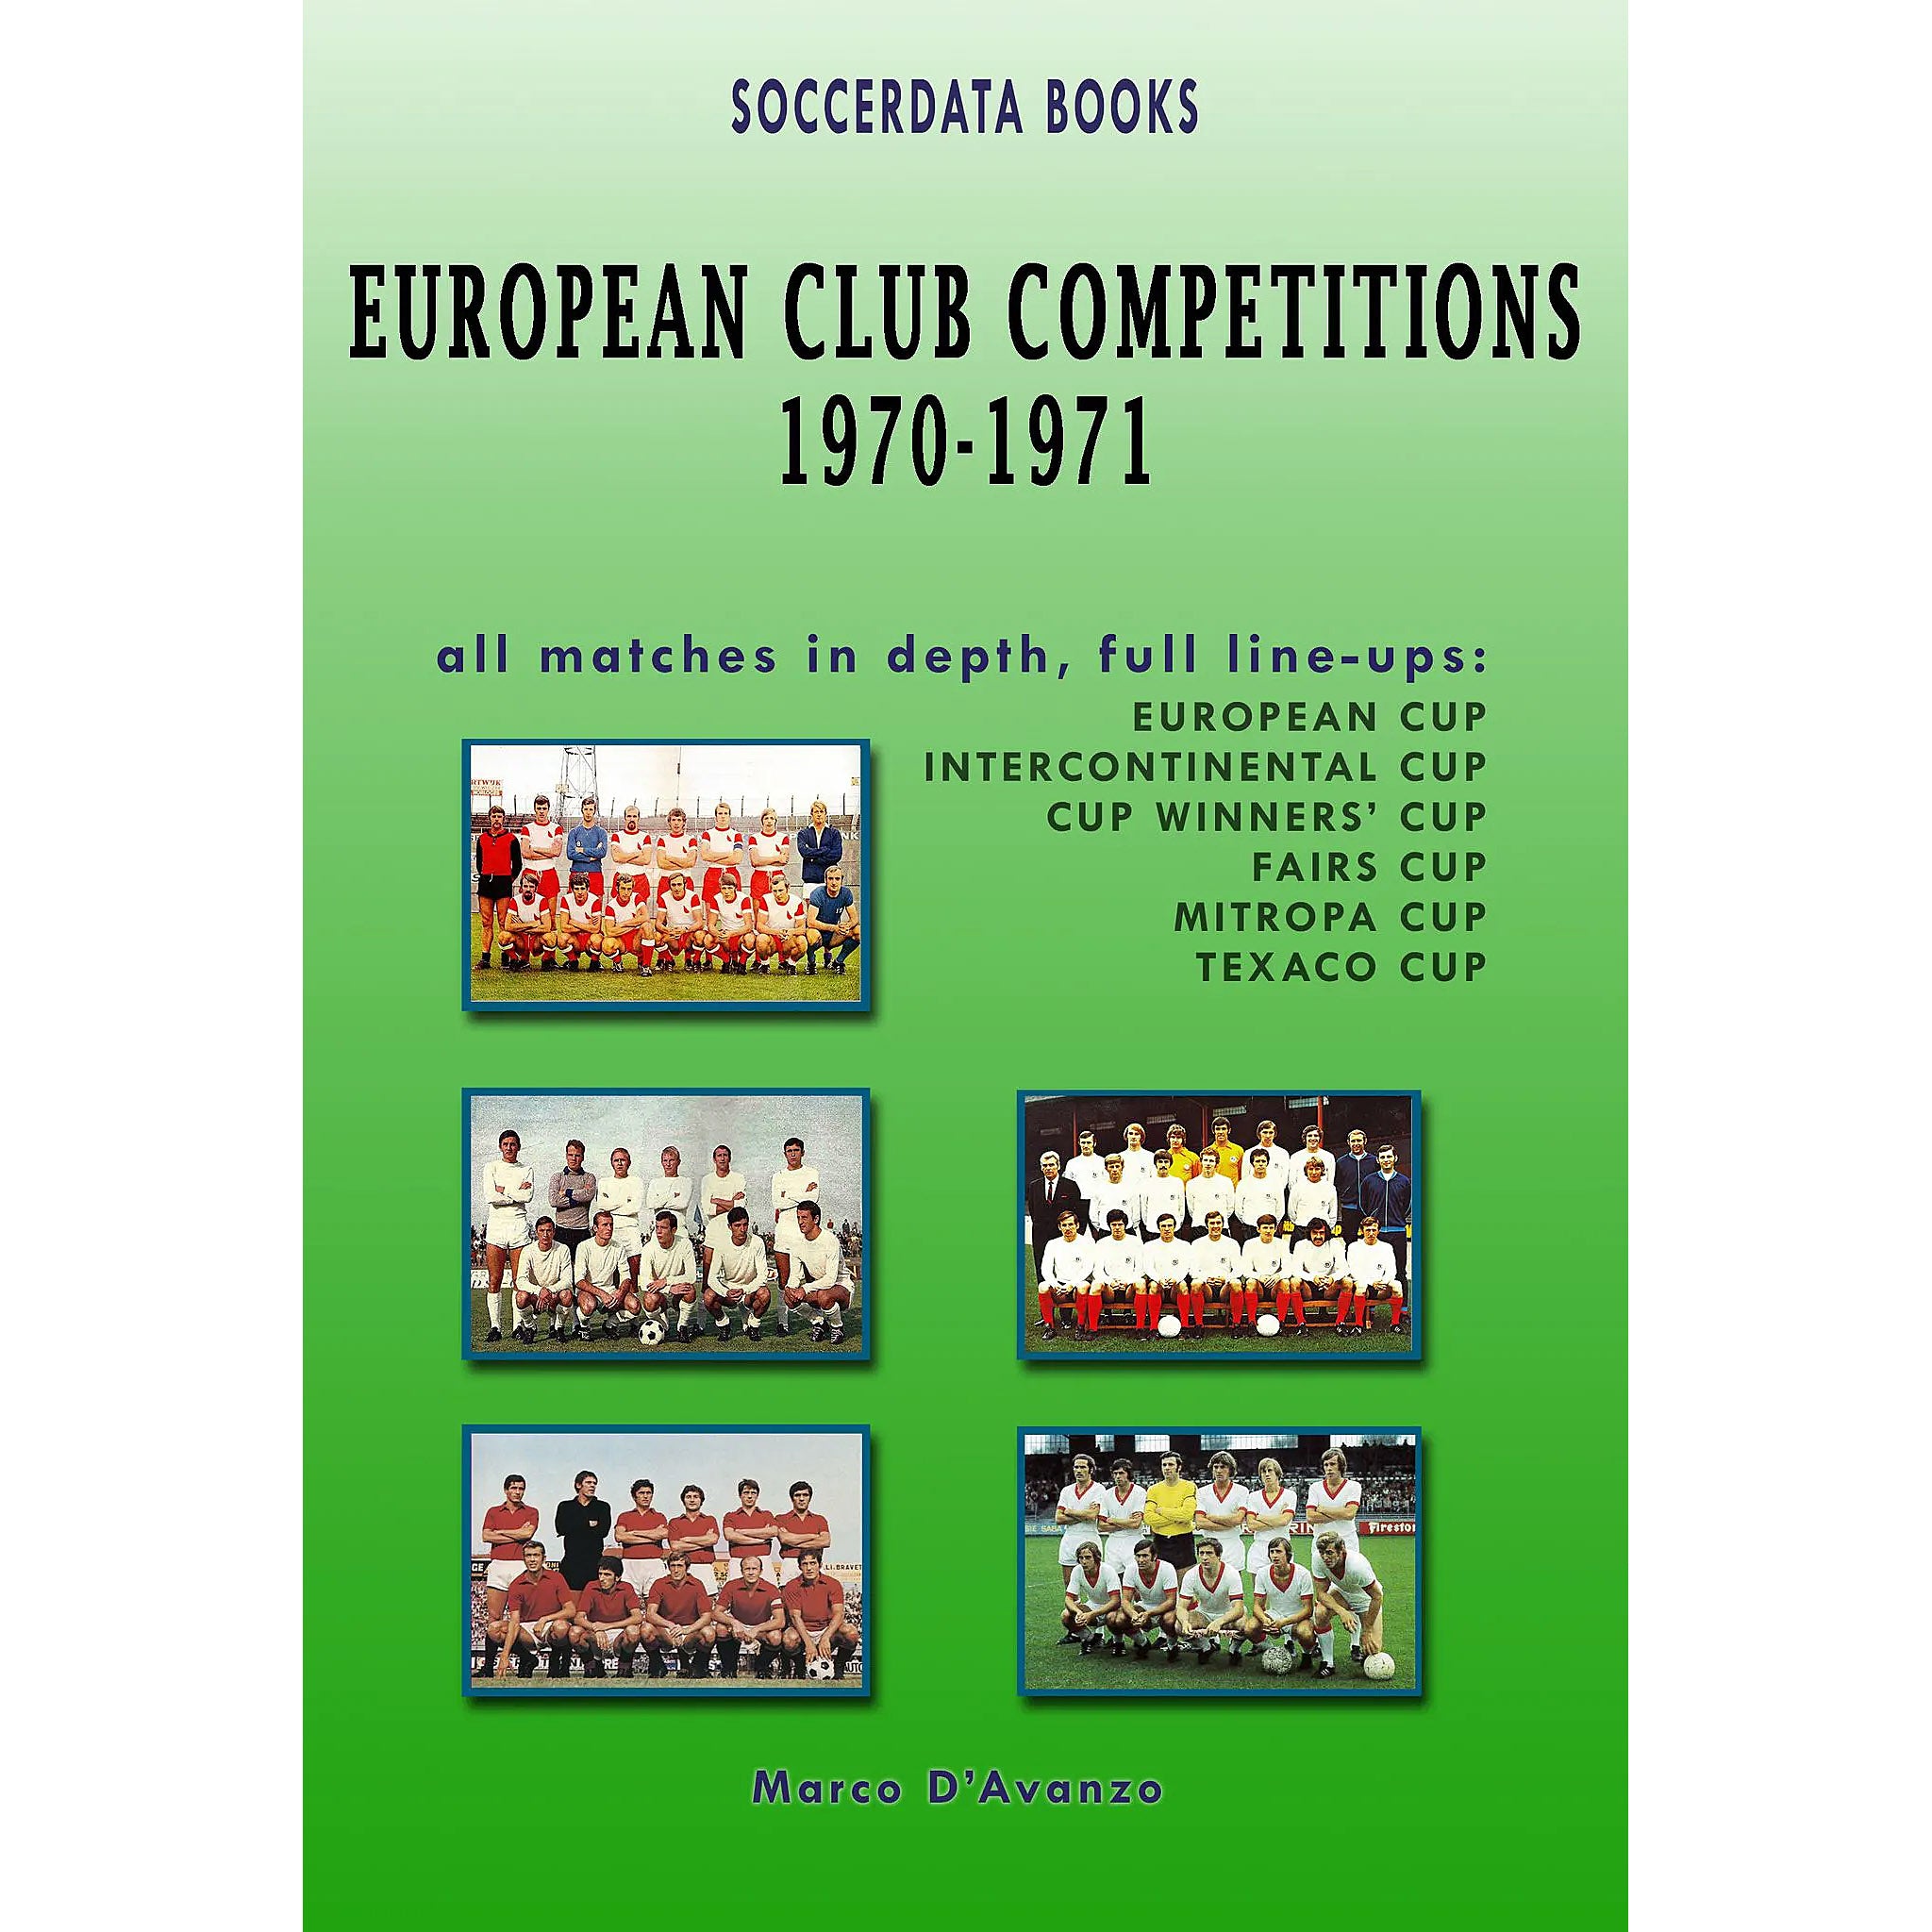 European Club Competitions 1970-1971